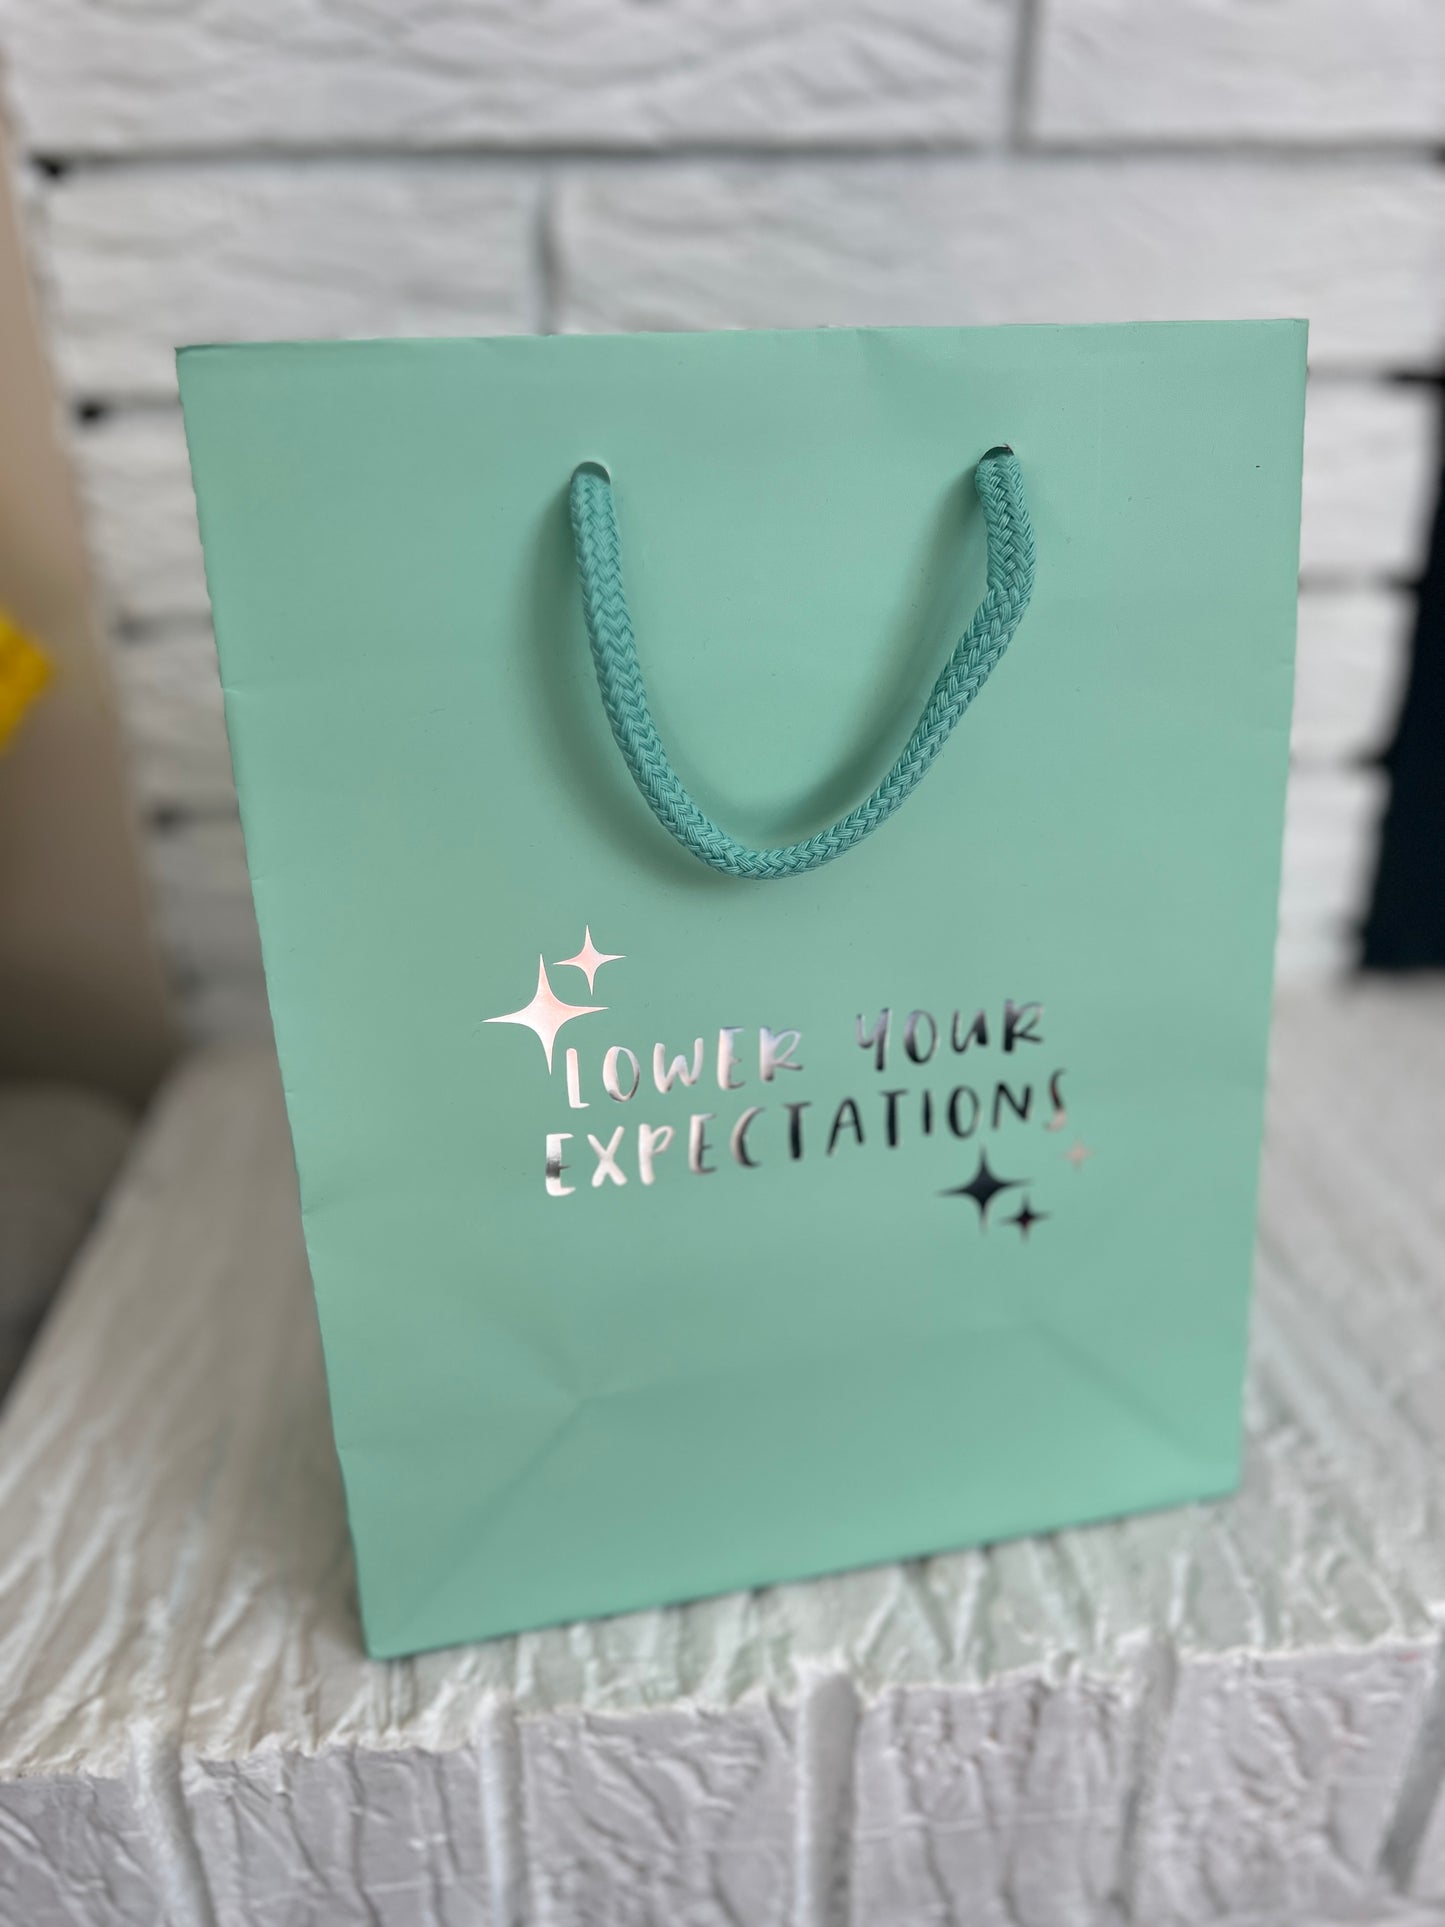 Gift Bag Lower Expectations—green